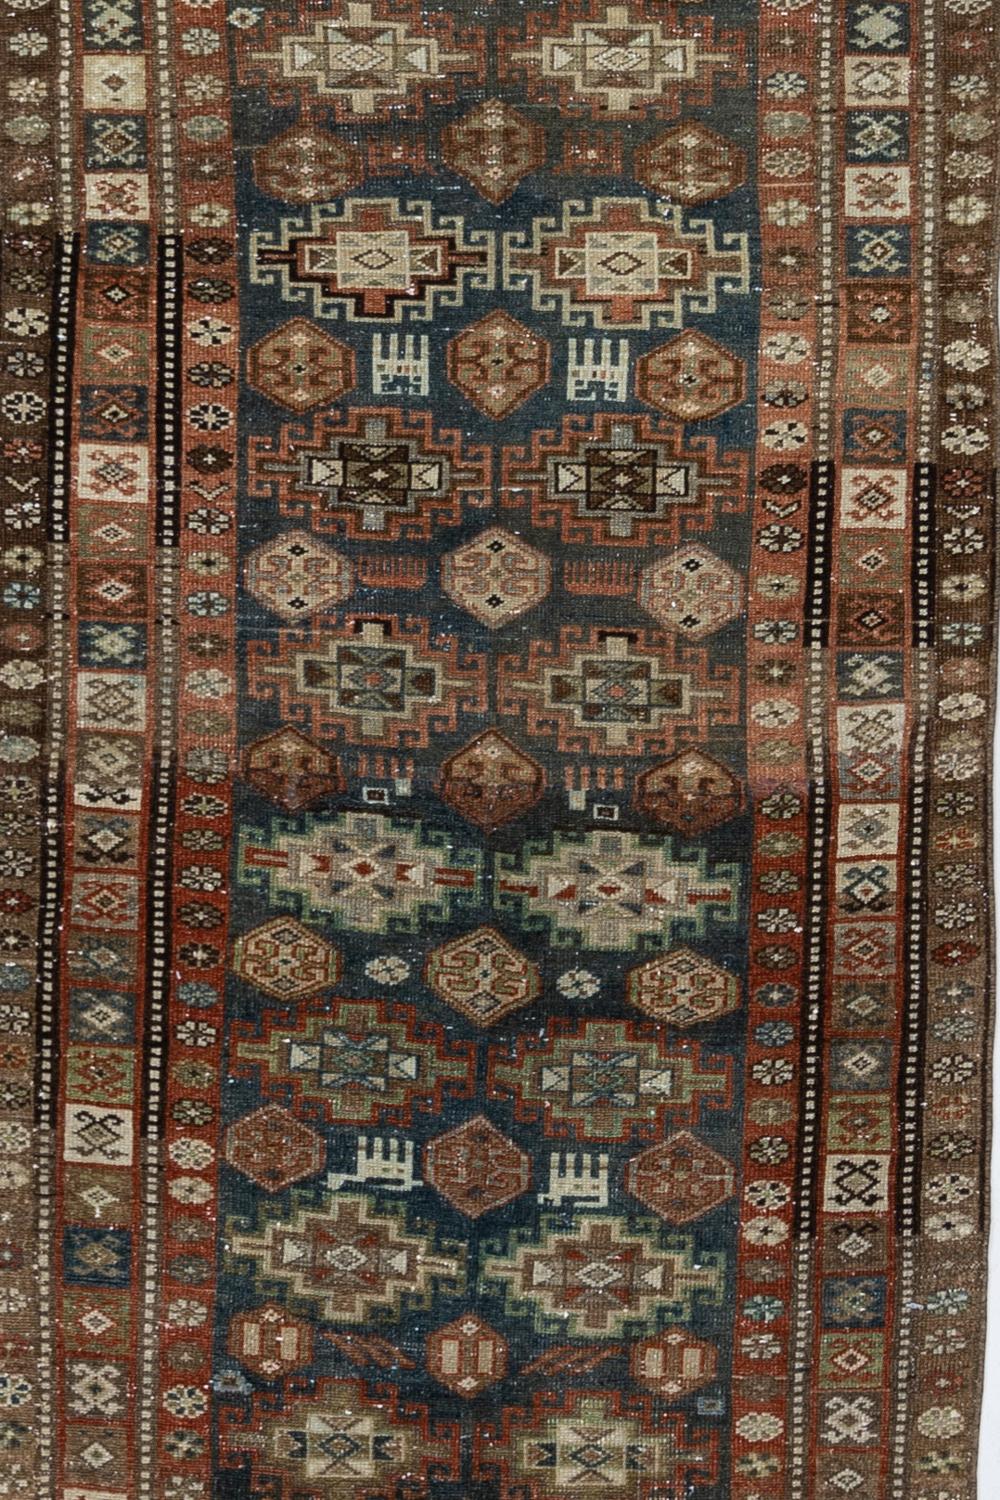 Age: late 19th century

Pile: Low

Wear Notes: 1

Material: Wool on wool

Vintage rugs are made by hand over the course of months, sometimes years. Their imperfections and wear are evidence of the hard working human hands that made them and